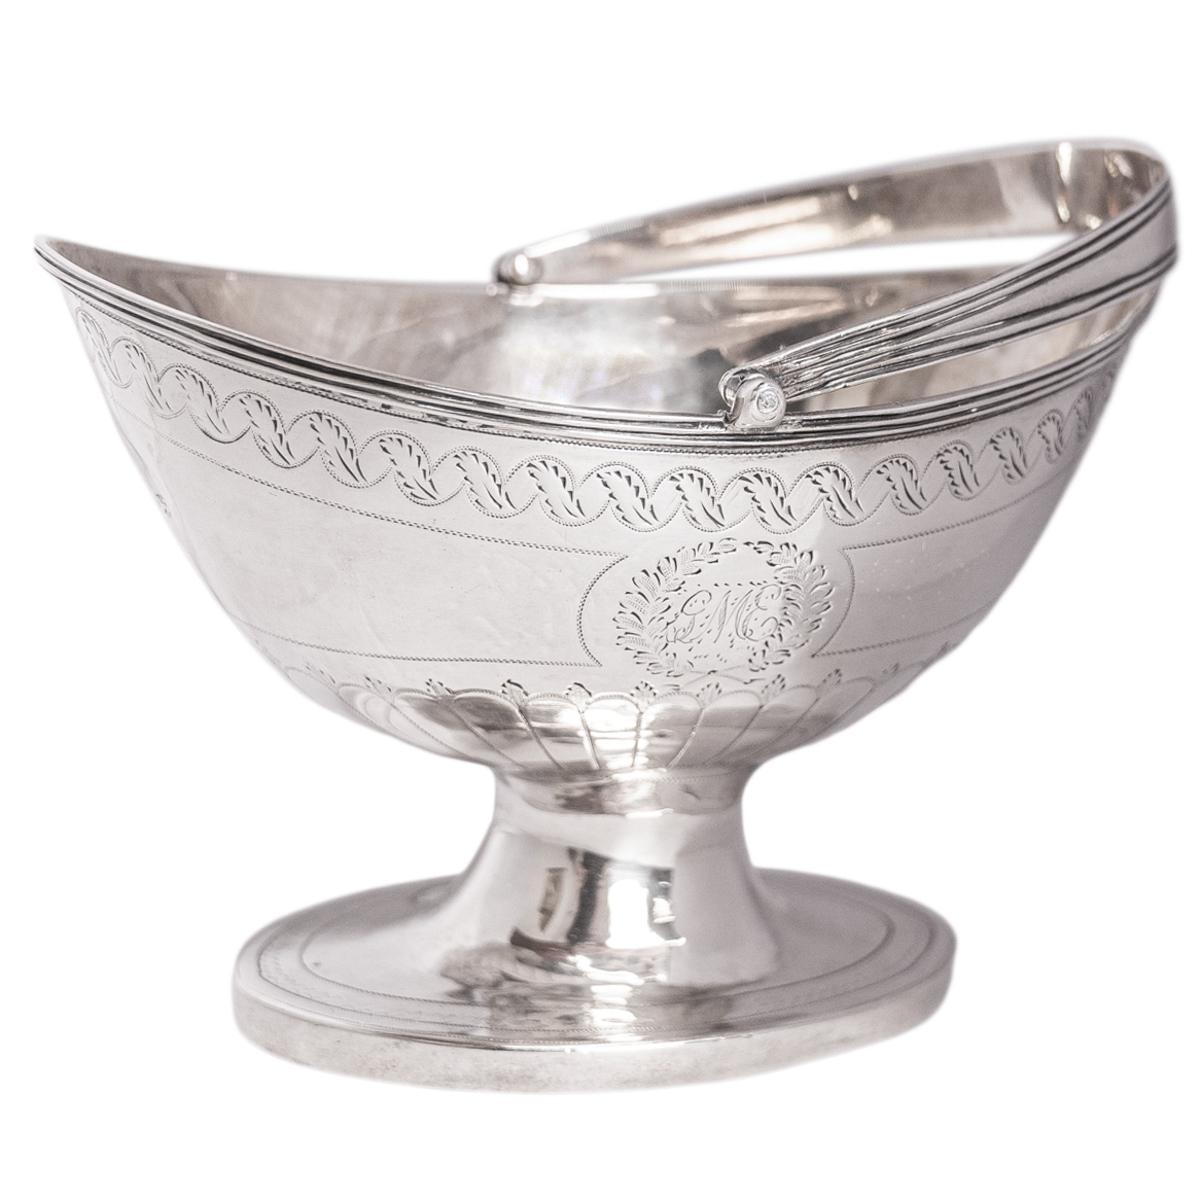 A fine antique Georgian sterling silver engraved sugar basket/bowl, London, circa 1790.
The sugar basket of helmet shape & fitted with a swing handle, the basket is rasied on a flared oval foot. The sugar basket is finely engraved with rope-twist